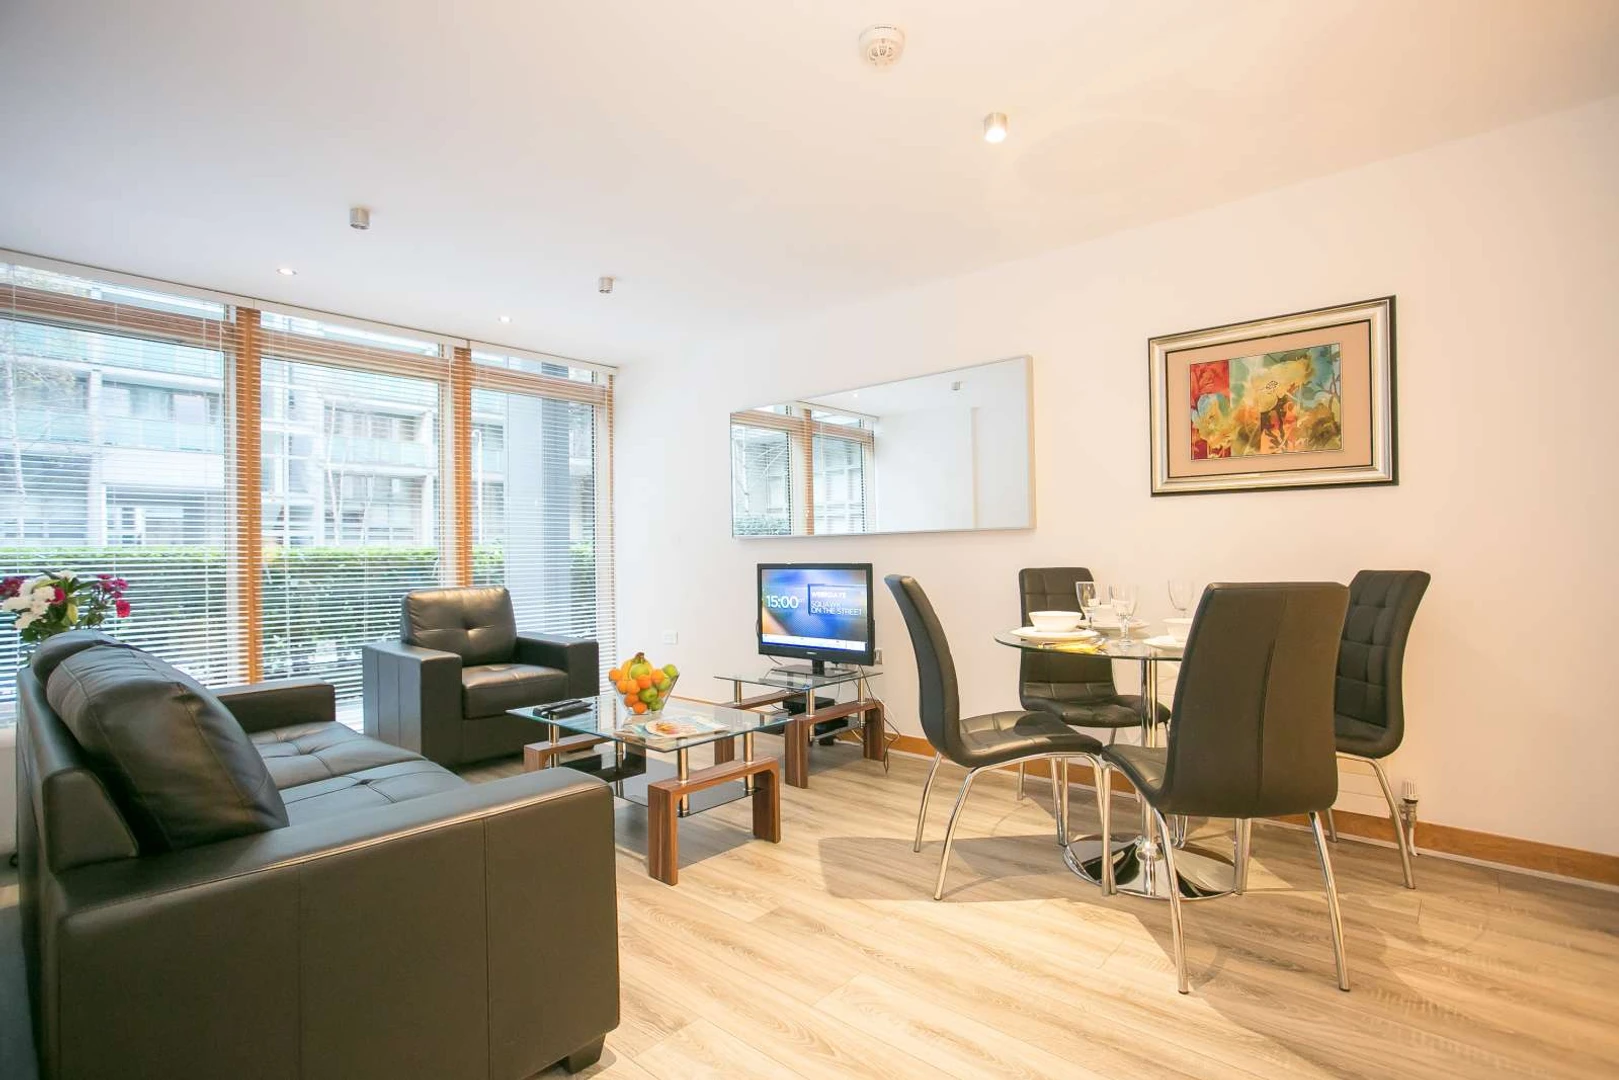 Accommodation in the centre of dublin